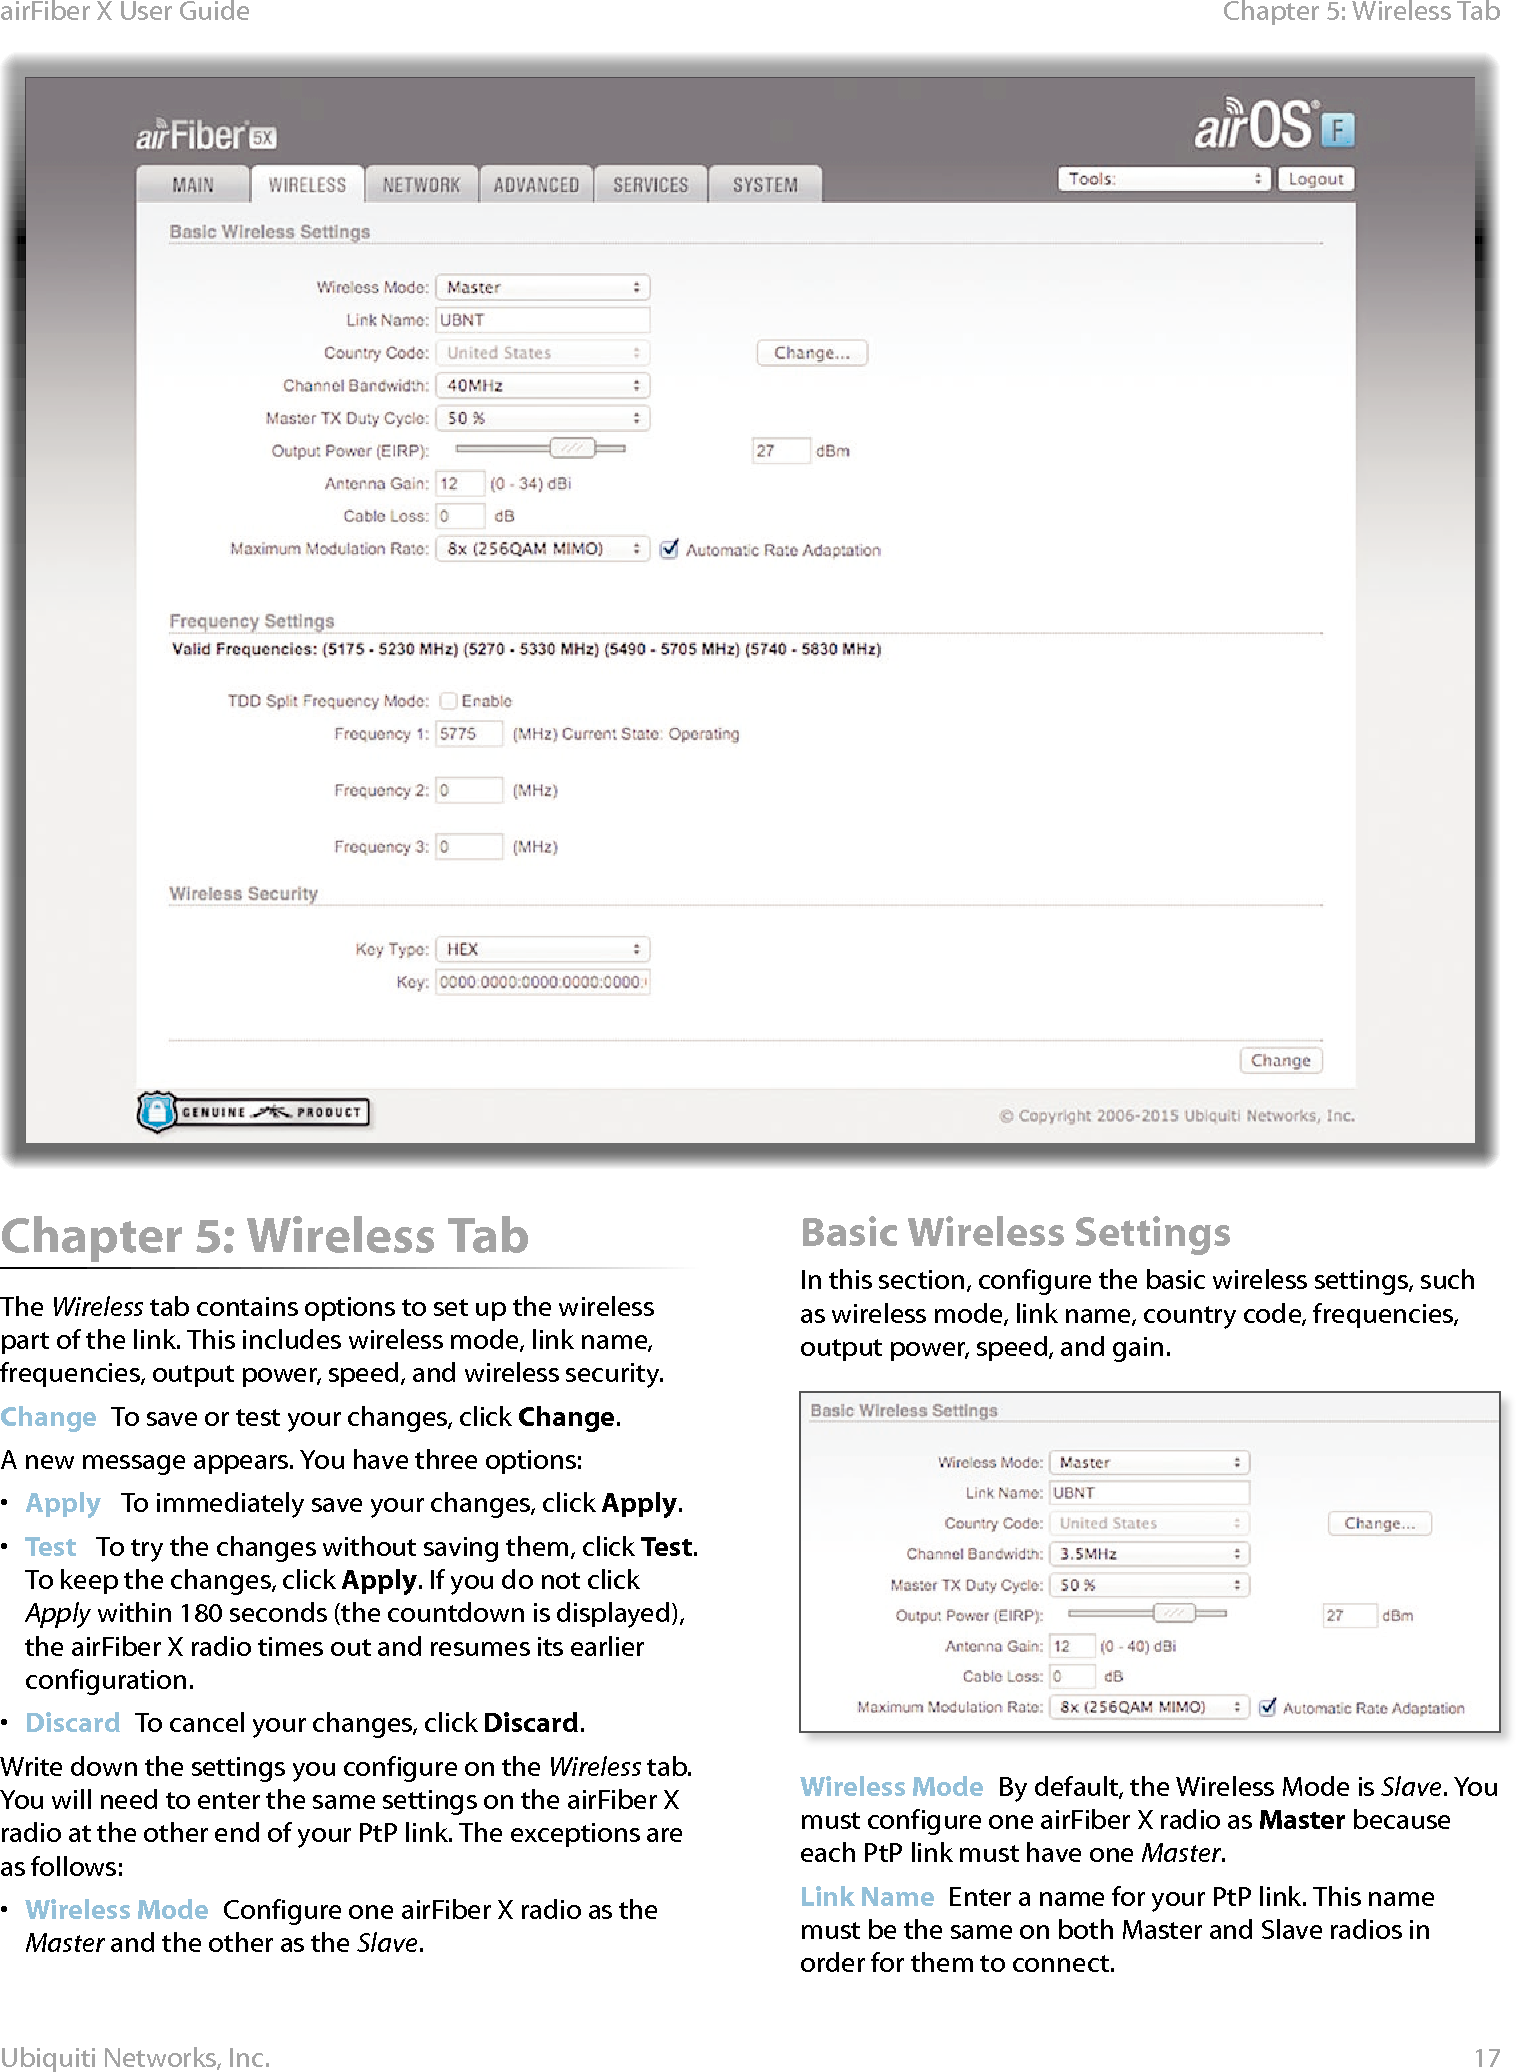 17Chapter 5: Wireless TabairFiber X User GuideUbiquiti Networks, Inc.Chapter 5: Wireless TabThe Wireless tab contains options to set up the wireless part of the link. This includes wireless mode, link name, frequencies, output power, speed, and wireless security.Change  To save or test your changes, click Change.A new message appears. You have three options:•  Apply   To immediately save your changes, click Apply.•  Test   To try the changes without saving them, click Test. To keep the changes, click Apply. If you do not click Apply within 180 seconds (the countdown is displayed), the airFiberX radio times out and resumes its earlier configuration.•  Discard  To cancel your changes, click Discard.Write down the settings you configure on the Wireless tab. You will need to enter the same settings on the airFiberX radio at the other end of your PtP link. The exceptions are as follows:•  Wireless Mode  Configure one airFiberX radio as the Master and the other as the Slave. Basic Wireless SettingsIn this section, configure the basic wireless settings, such as wireless mode, link name, country code, frequencies, output power, speed, and gain.Wireless Mode  By default, the Wireless Mode is Slave. You must configure one airFiberX radio as Master because each PtP link must have one Master.Link Name  Enter a name for your PtP link. This name must be the same on both Master and Slave radios in order for them to connect.